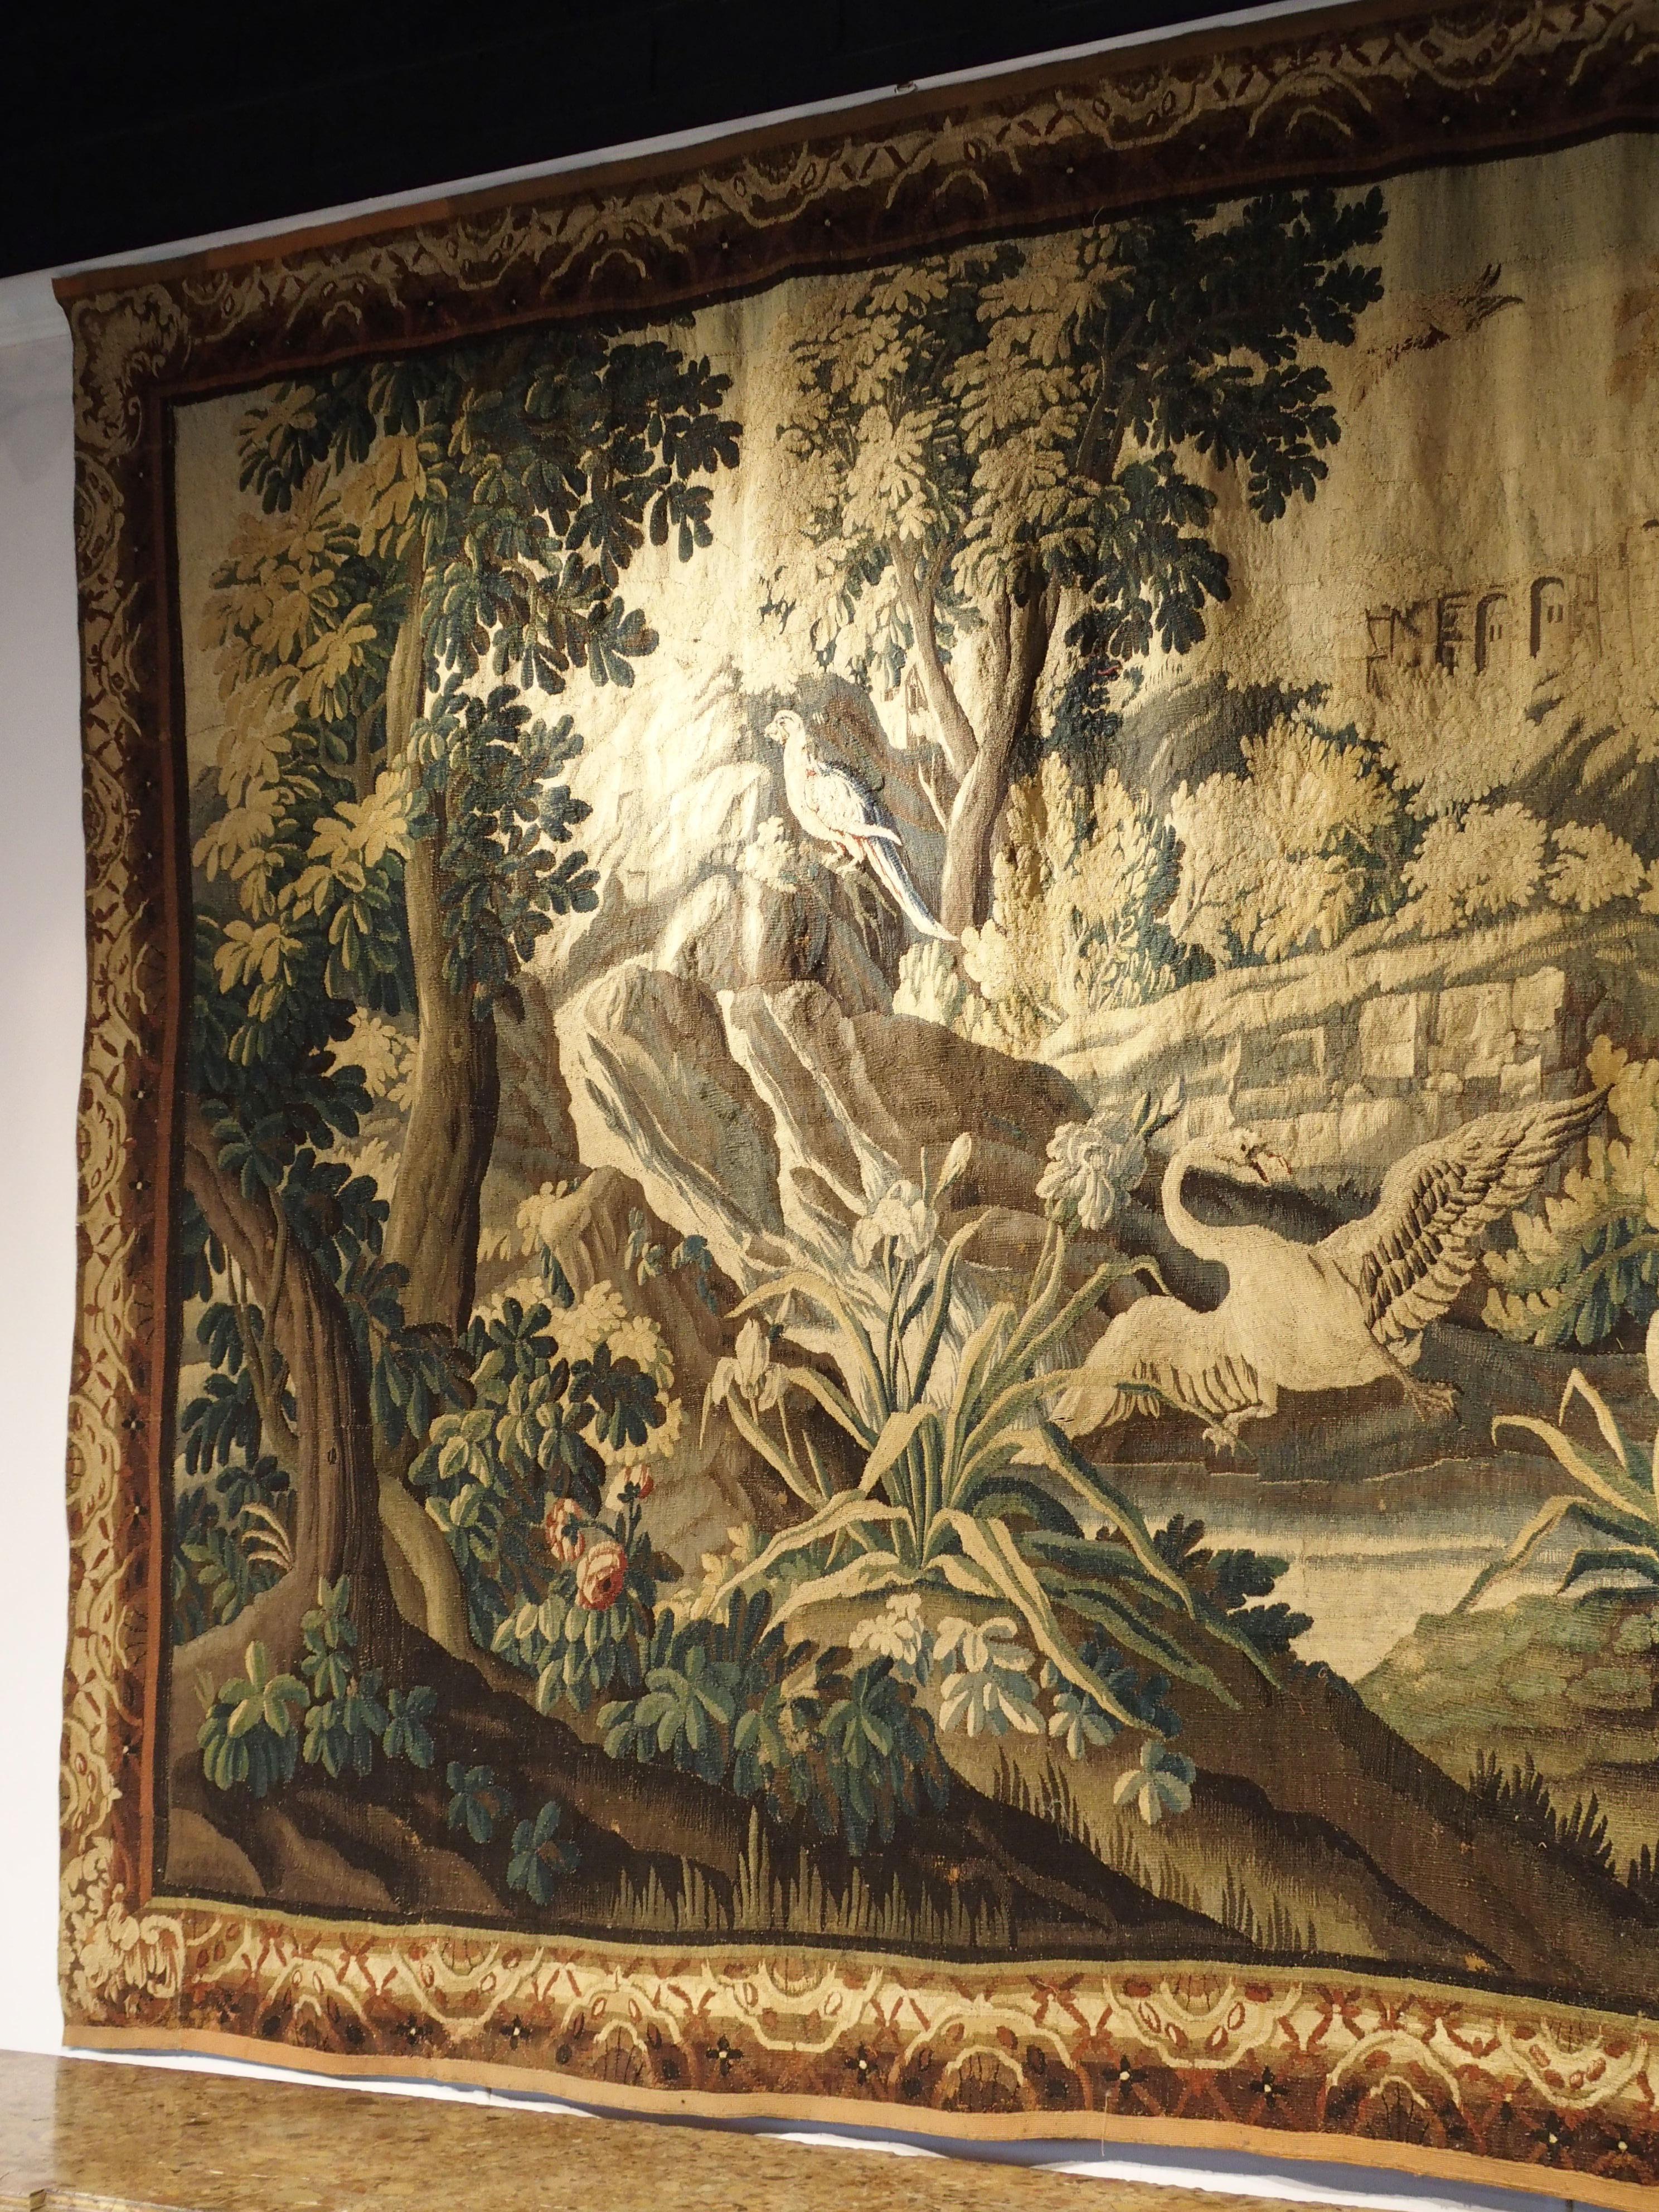 Large 18th Century Wool and Silk Verdure Landscape Tapestry from Flanders (Wolle)